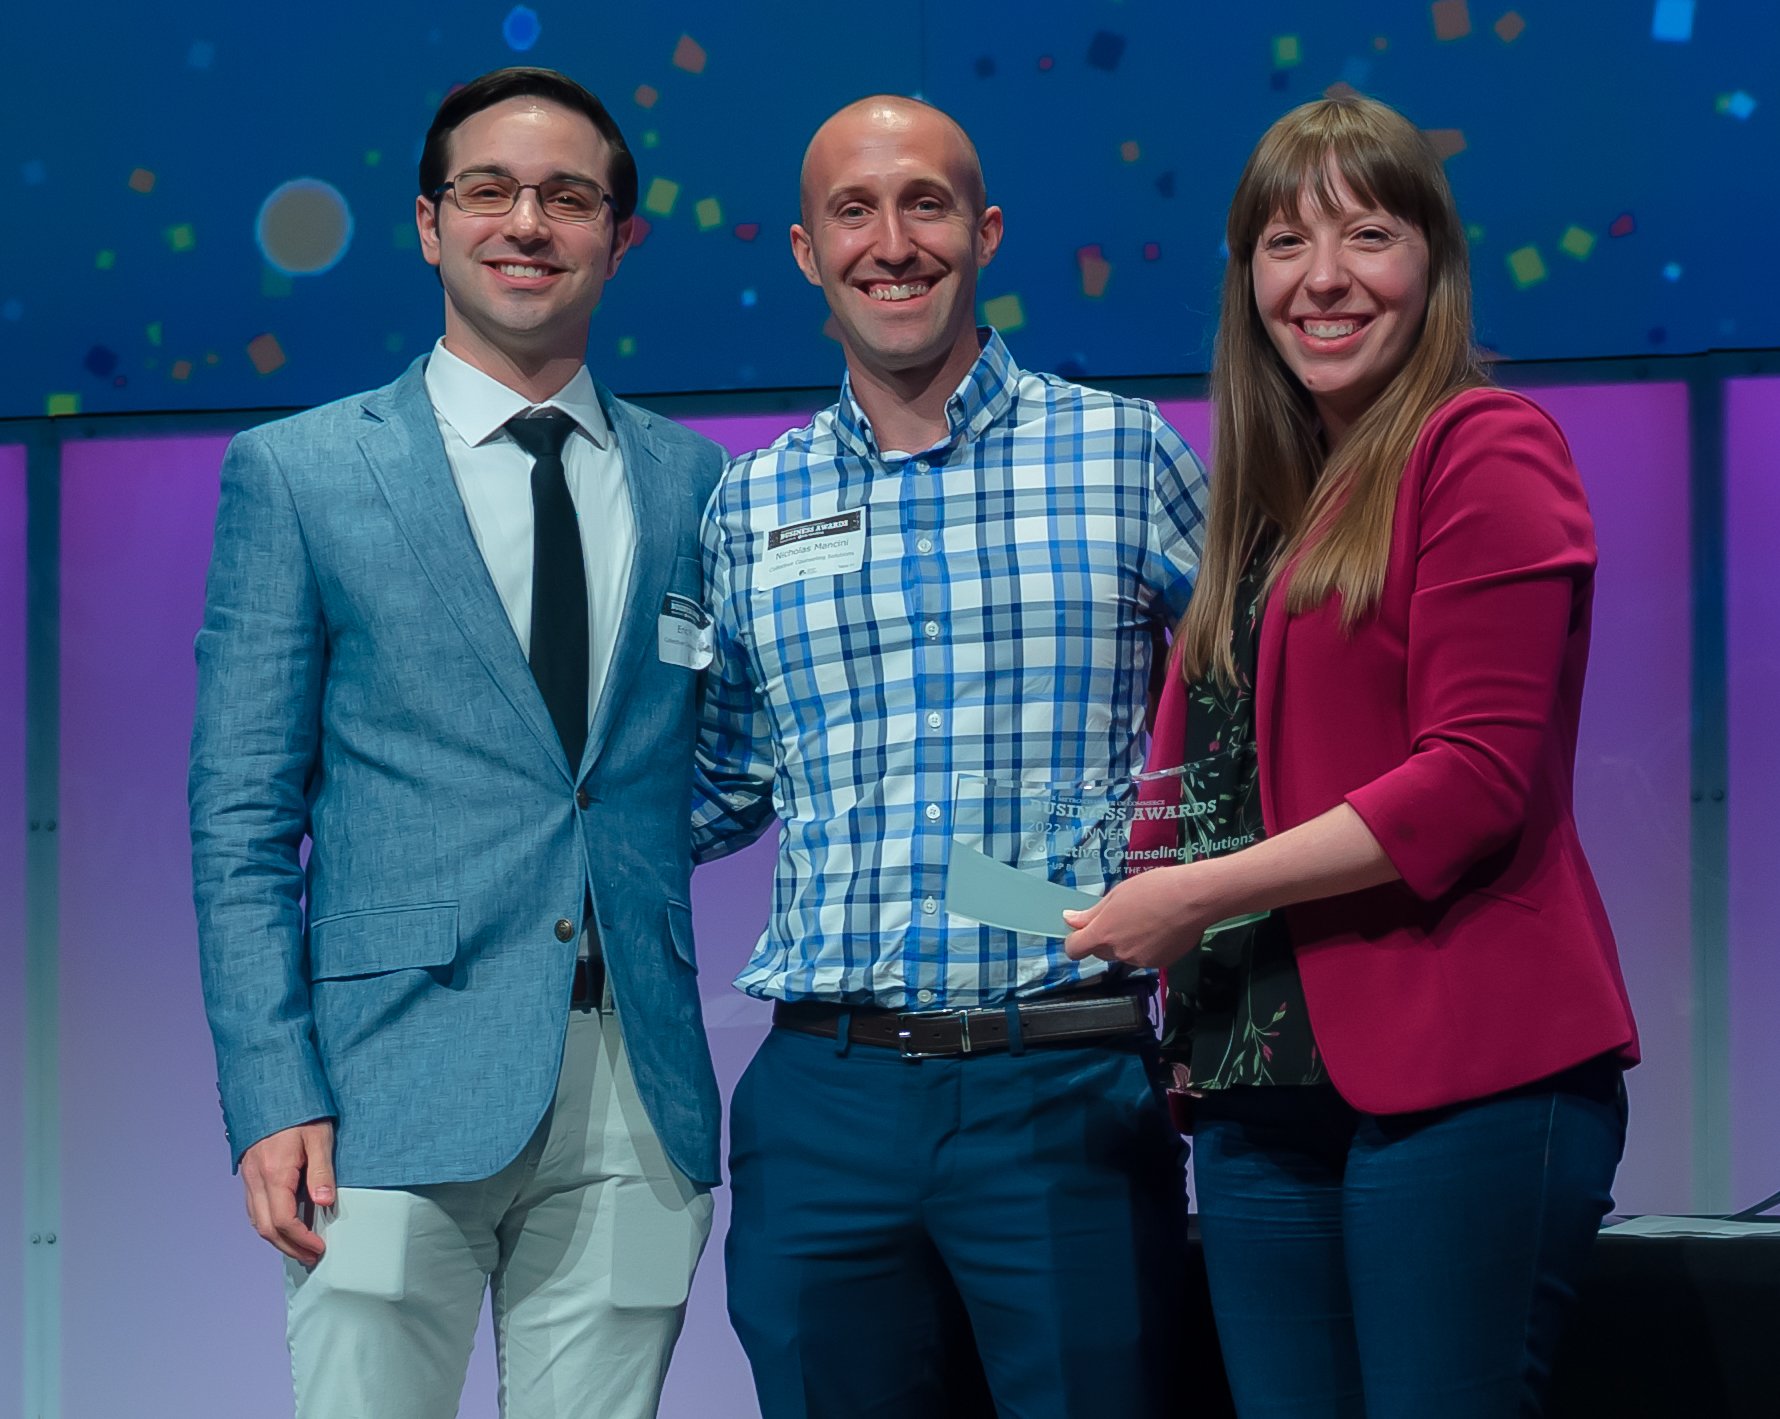 collective counseling solutions wins startup of the year